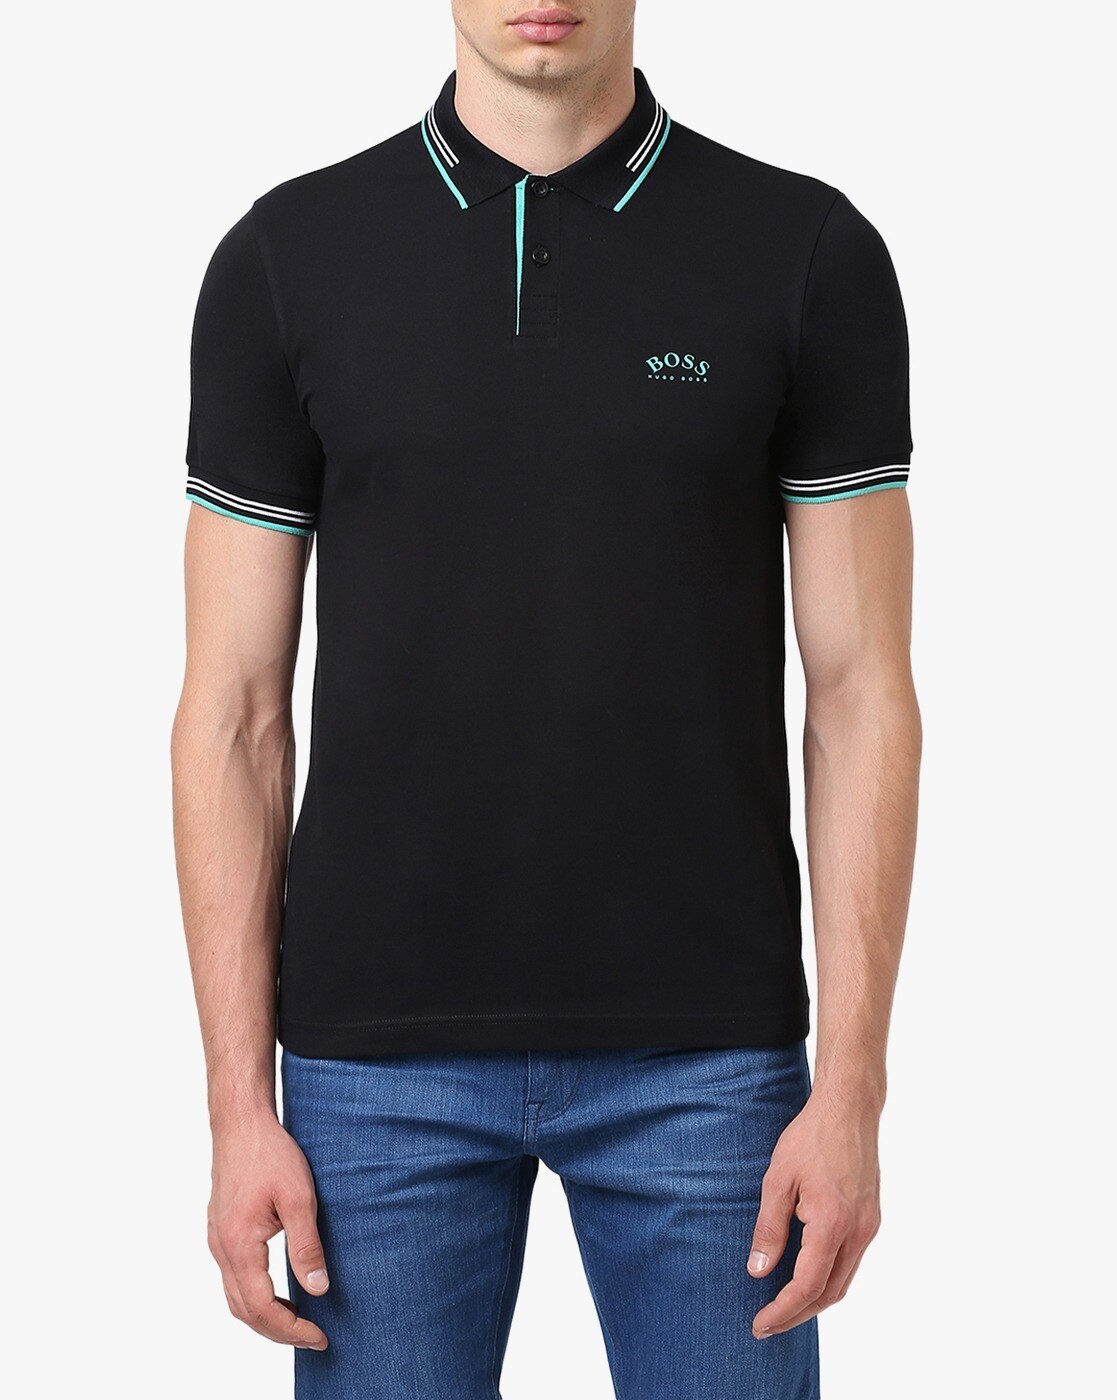 price of hugo boss t shirts in india